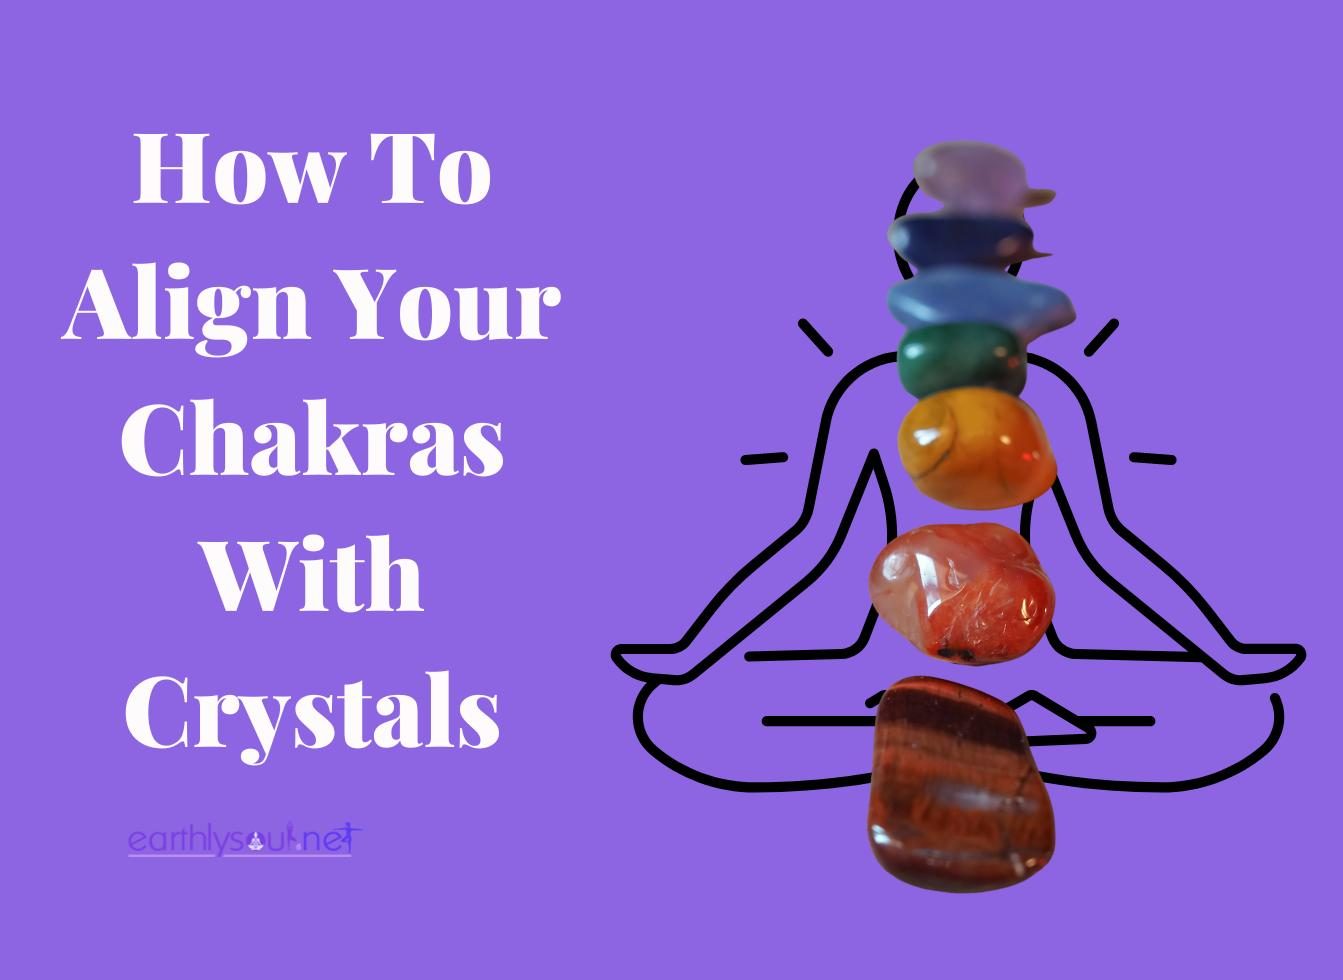 Align crystals with chakras featured image